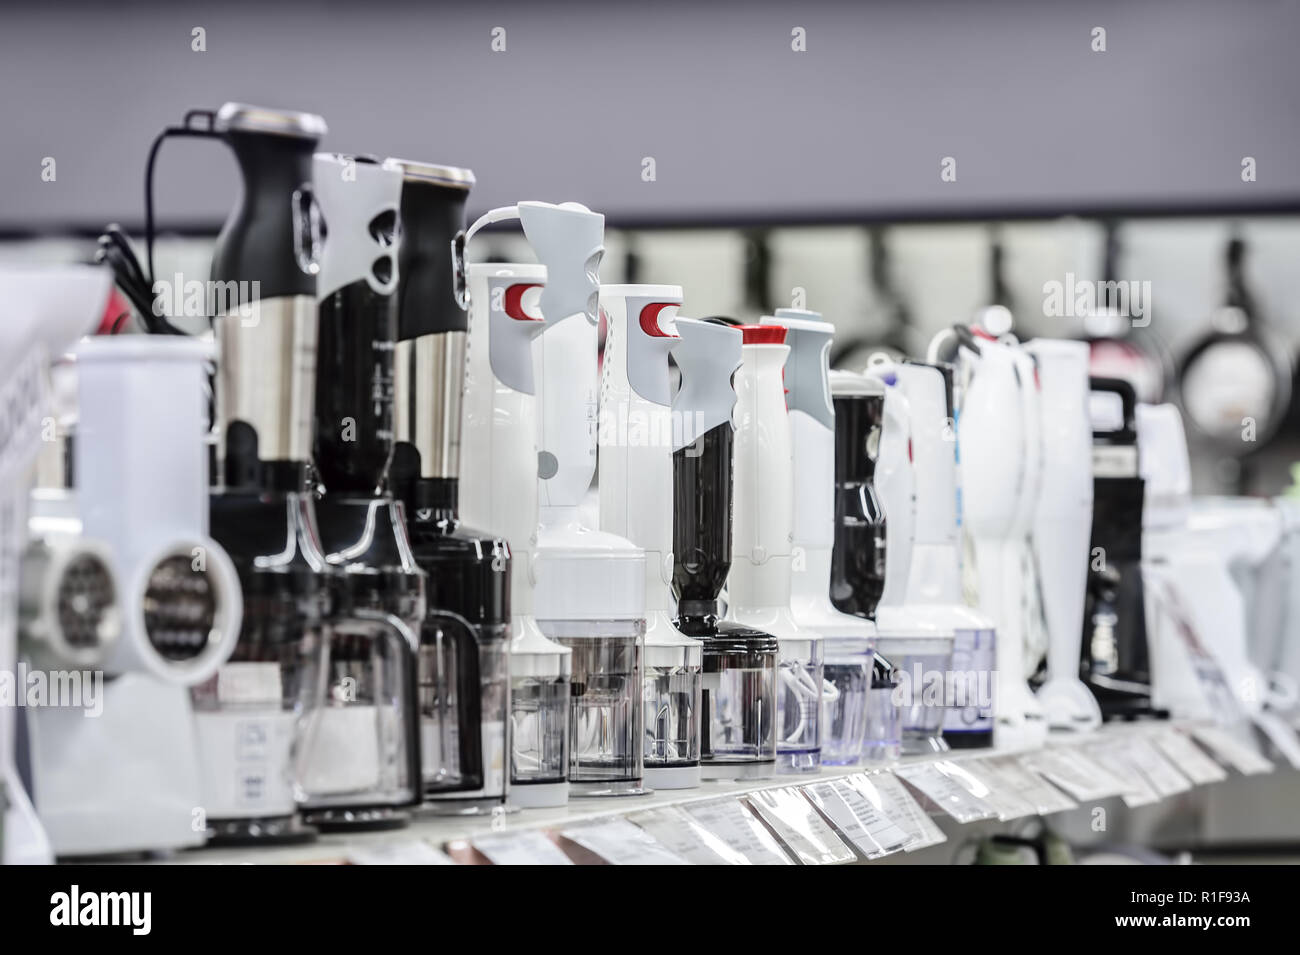 row of variety blenders in retail store Stock Photo